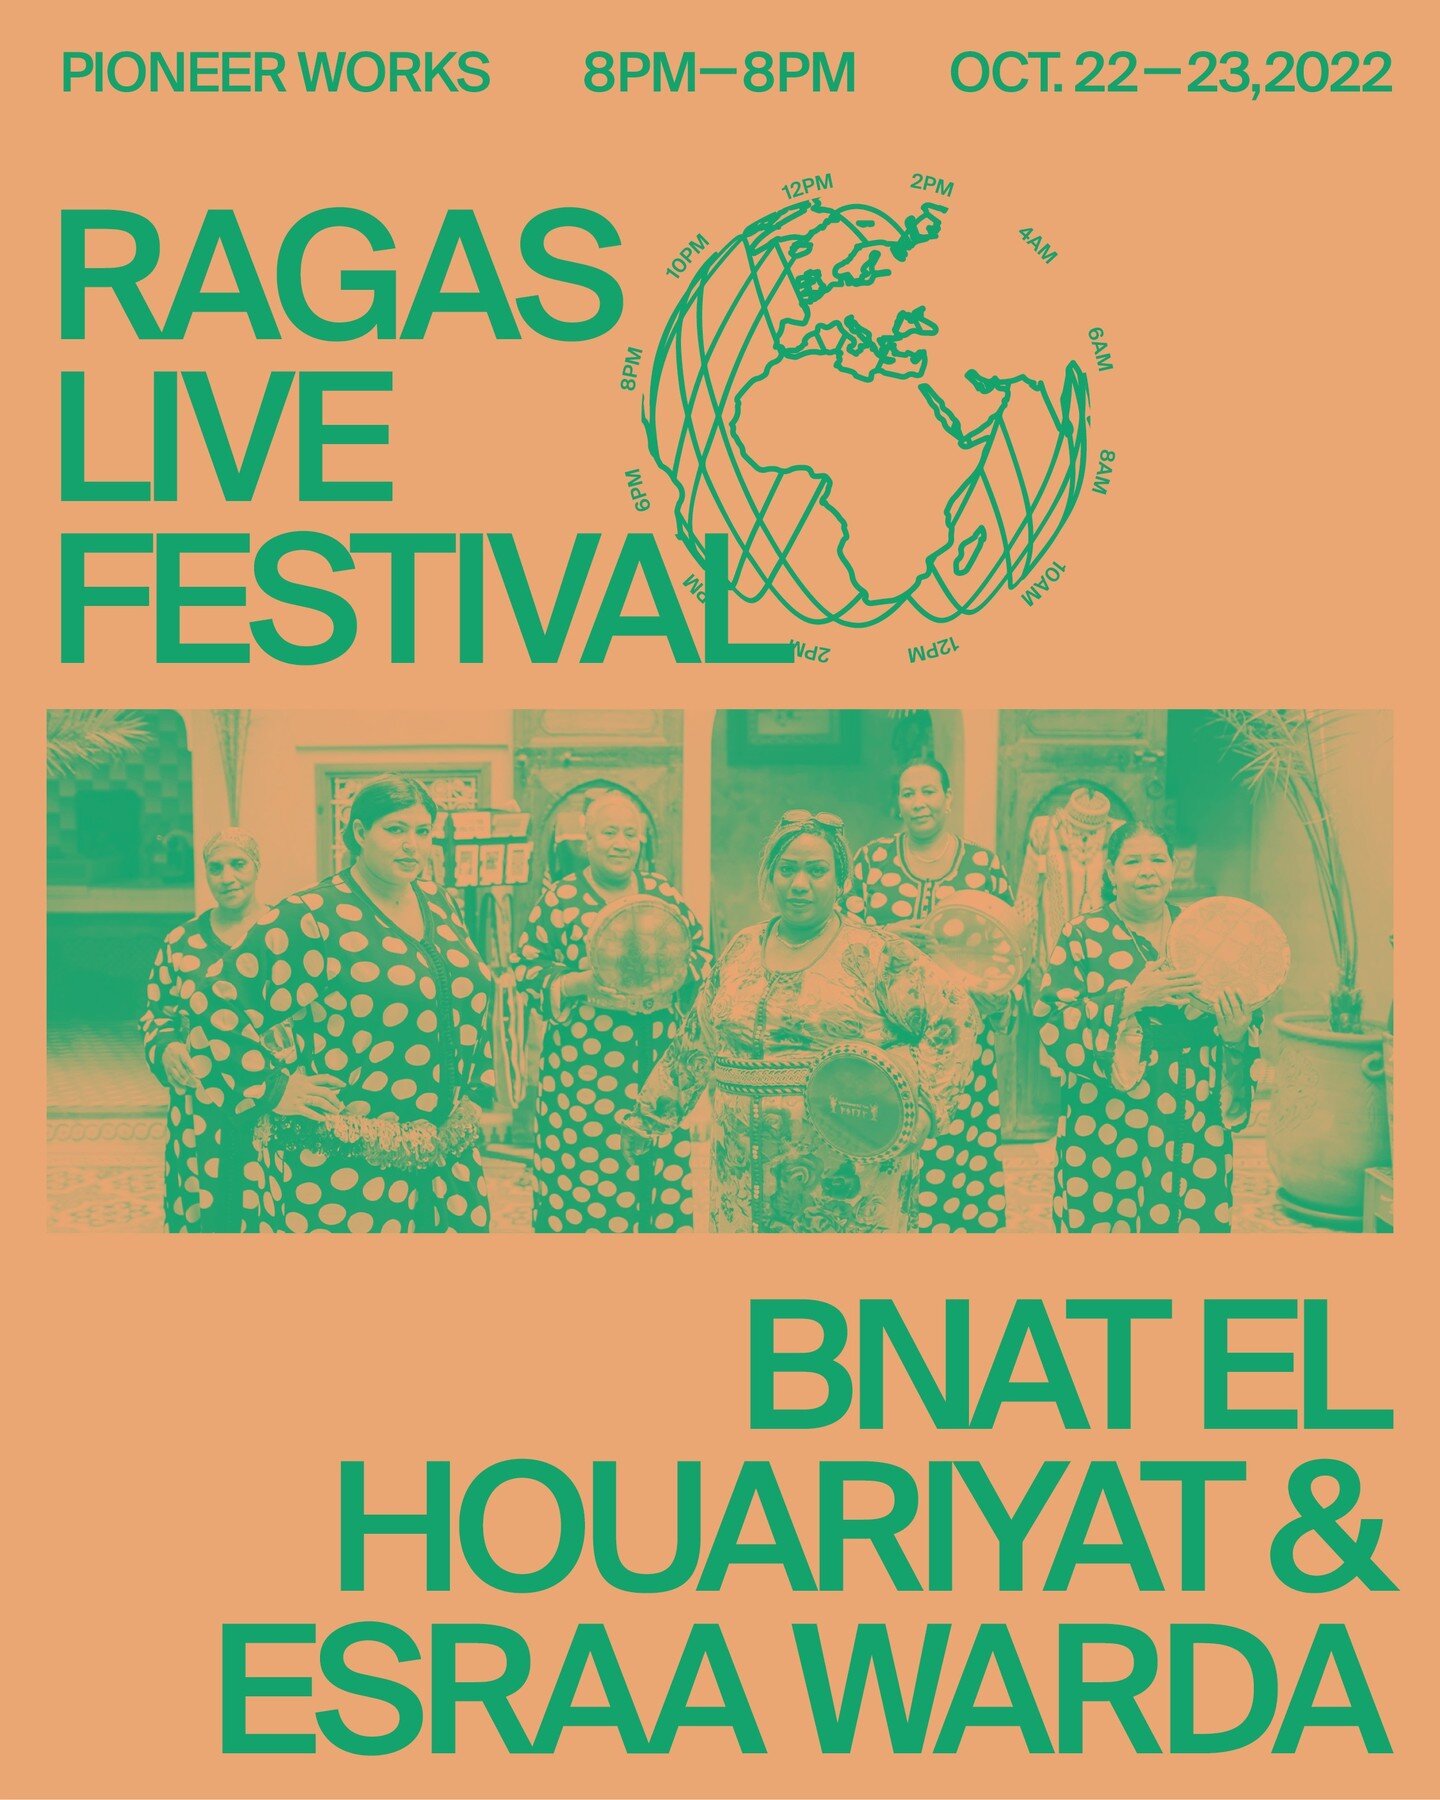 After selling out both of their shows at Habibi Festival 2022, New Yorkers have one more chance to catch @bnat_elhouariyat this weekend at the @ragaslivefestival at @pioneerworks! 
*
This 24-hour festival features a phenomenal lineup of raga-inspired